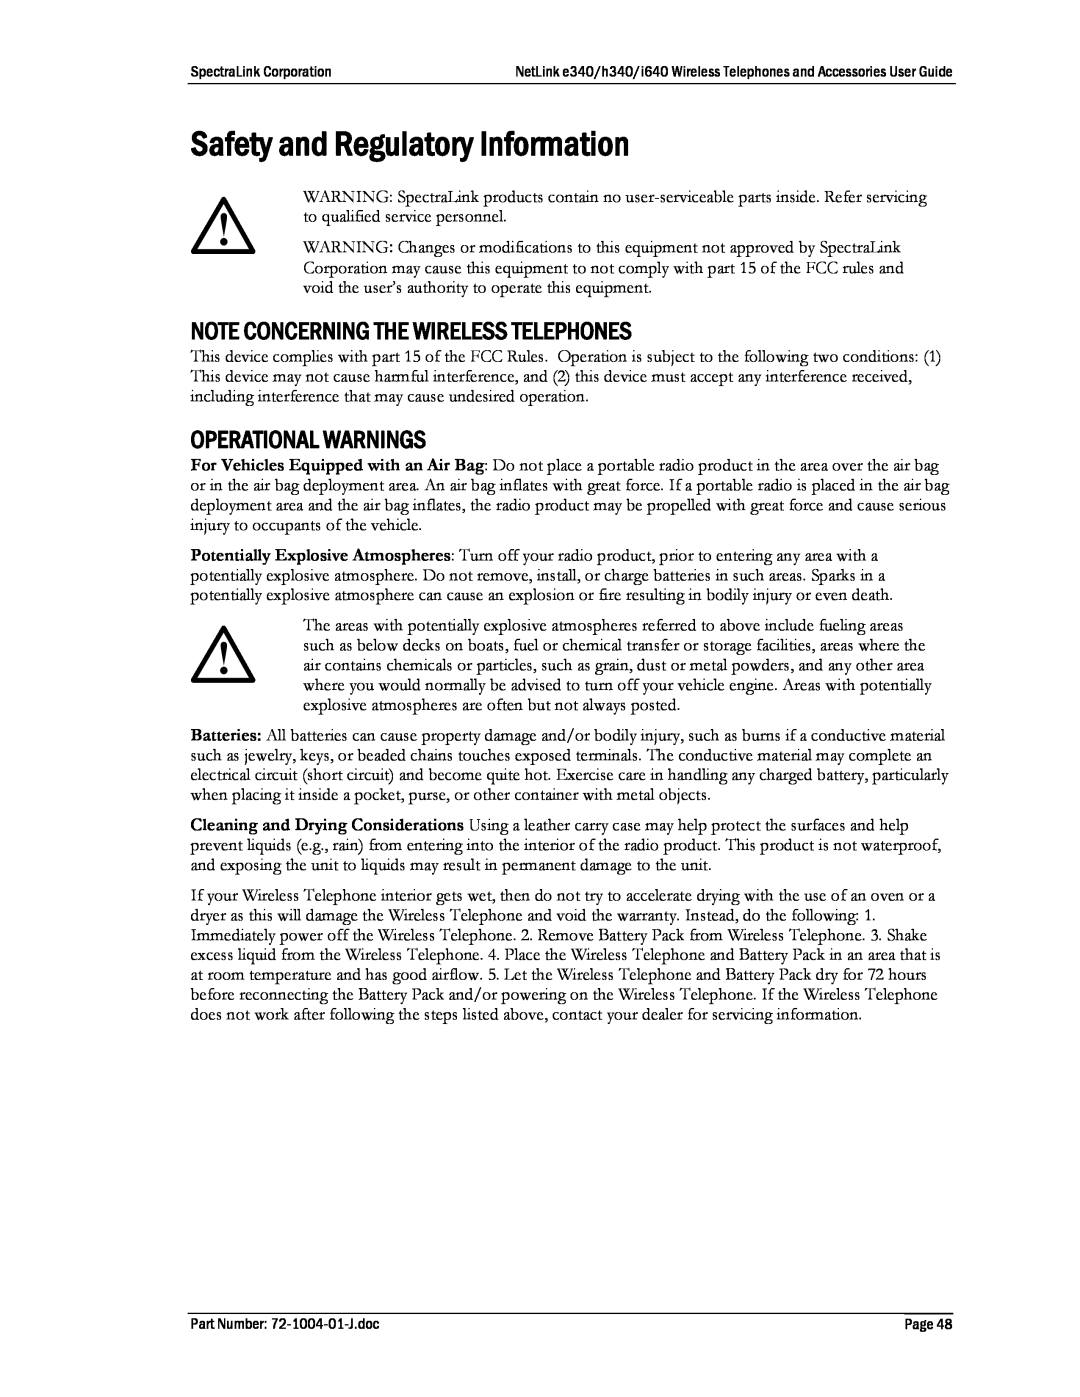 Polycom BPN100, BPX100 Safety and Regulatory Information, Note Concerning The Wireless Telephones, Operational Warnings 